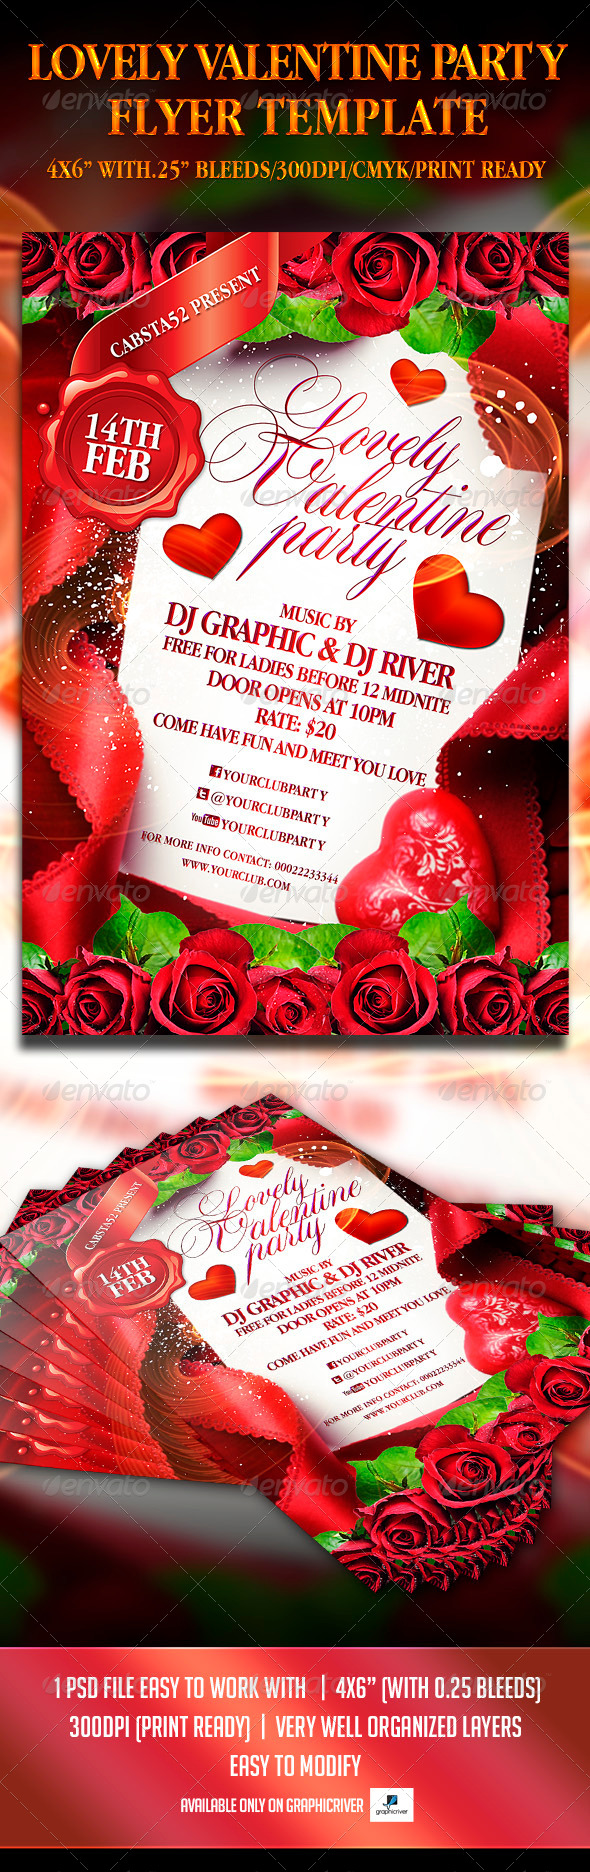 Lovely Valentine Party Flyer Template